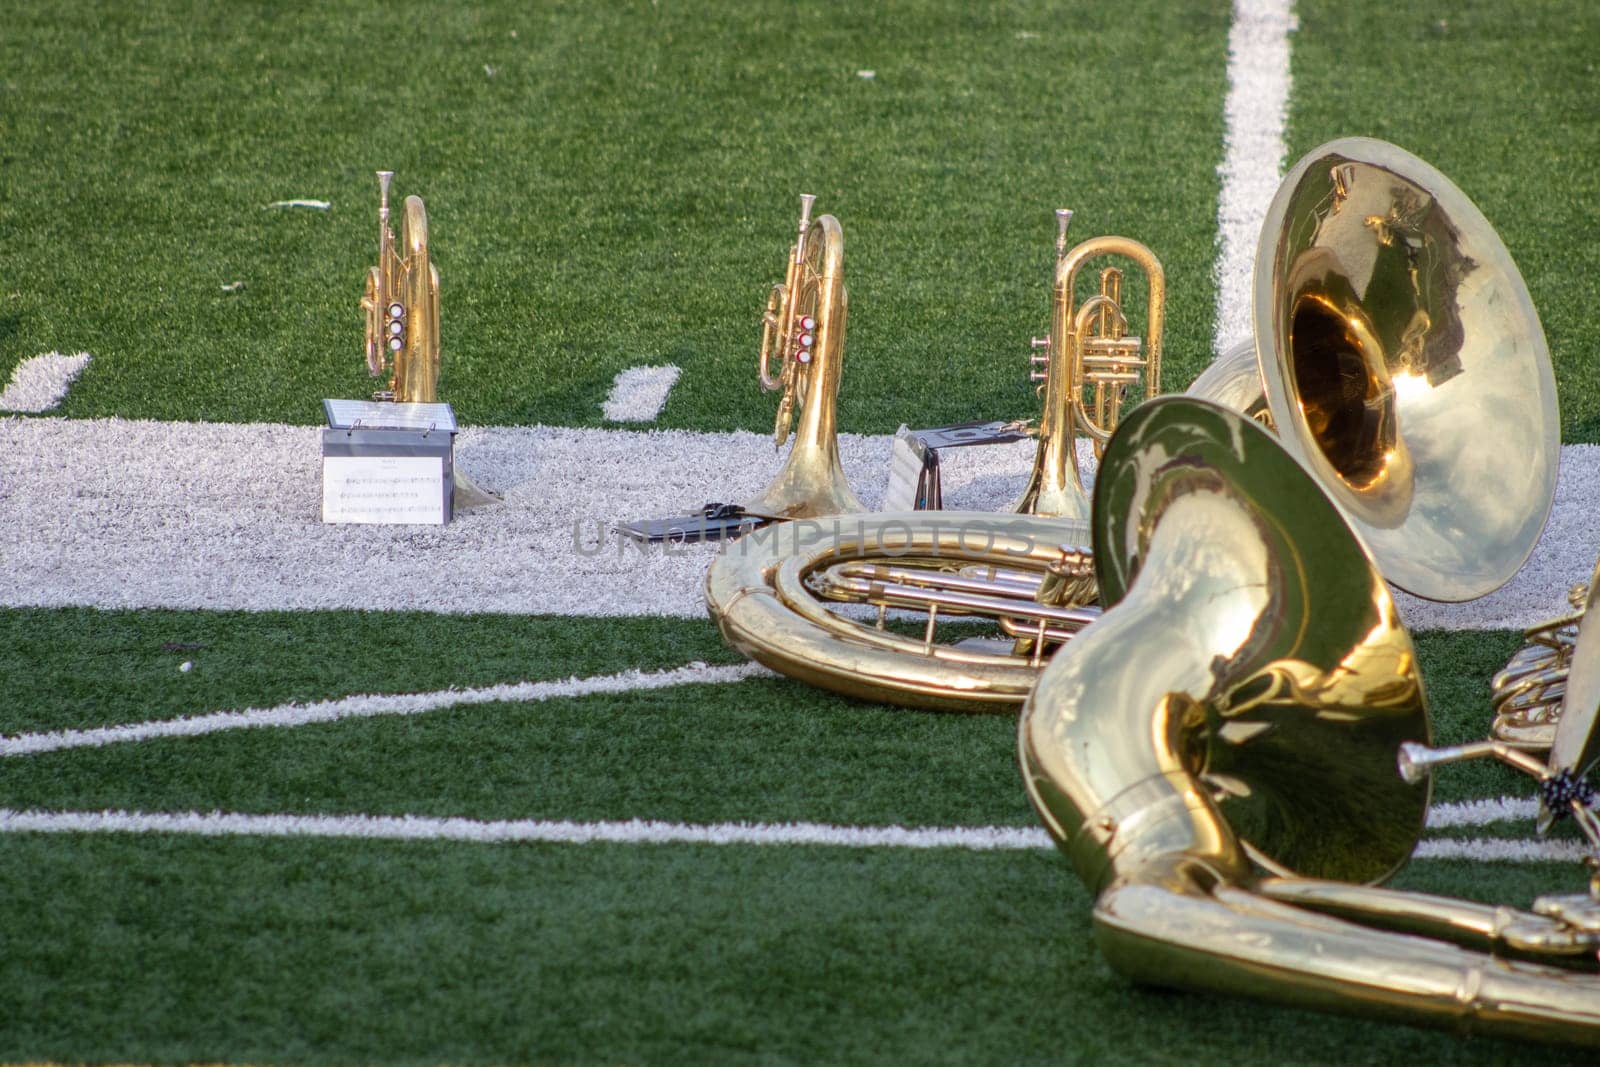 High School Band Instruments set on football field ready to play by gena_wells